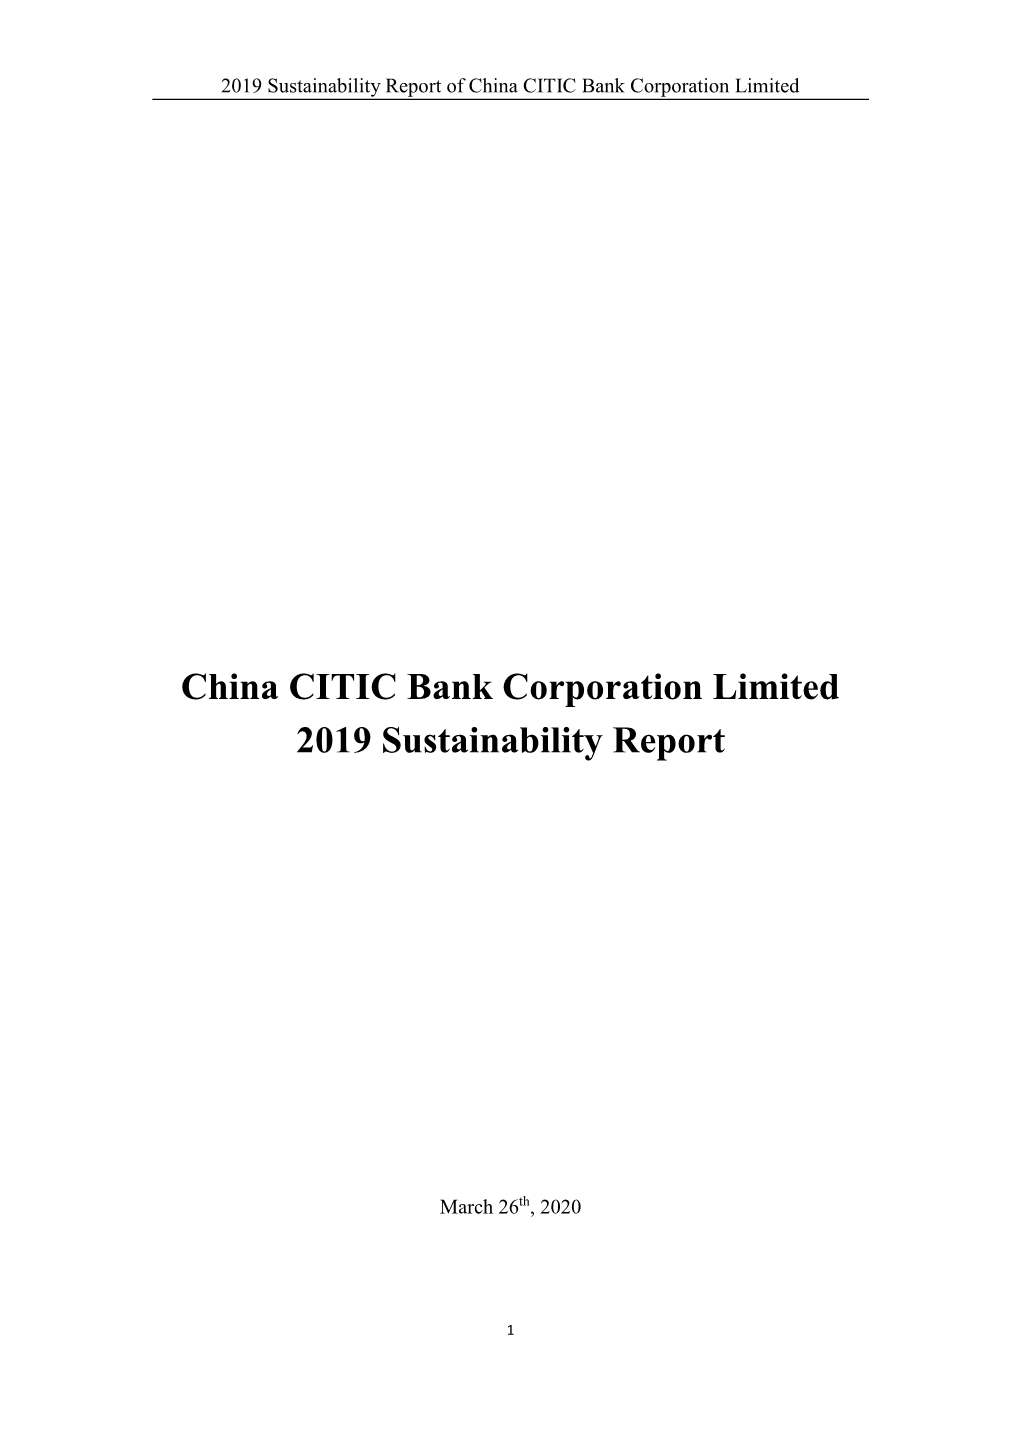 China CITIC Bank Corporation Limited 2019 Sustainability Report